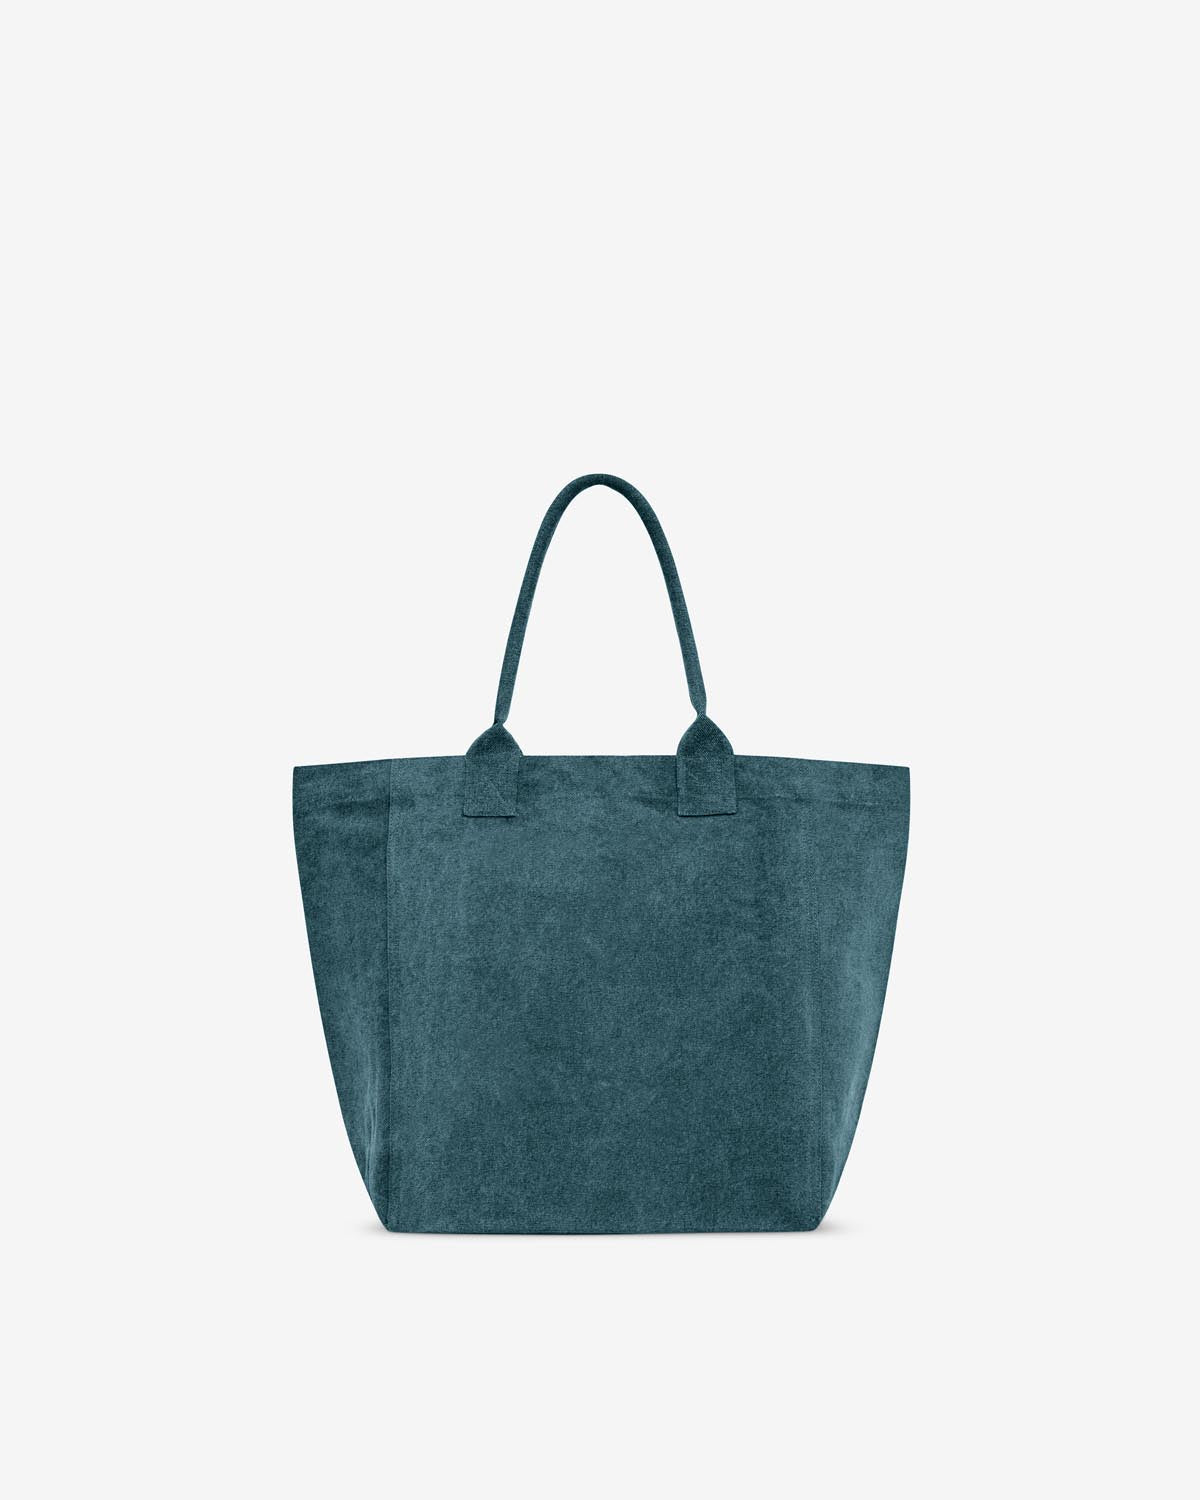 Bolso tote yenky Woman Verde oscuro 7